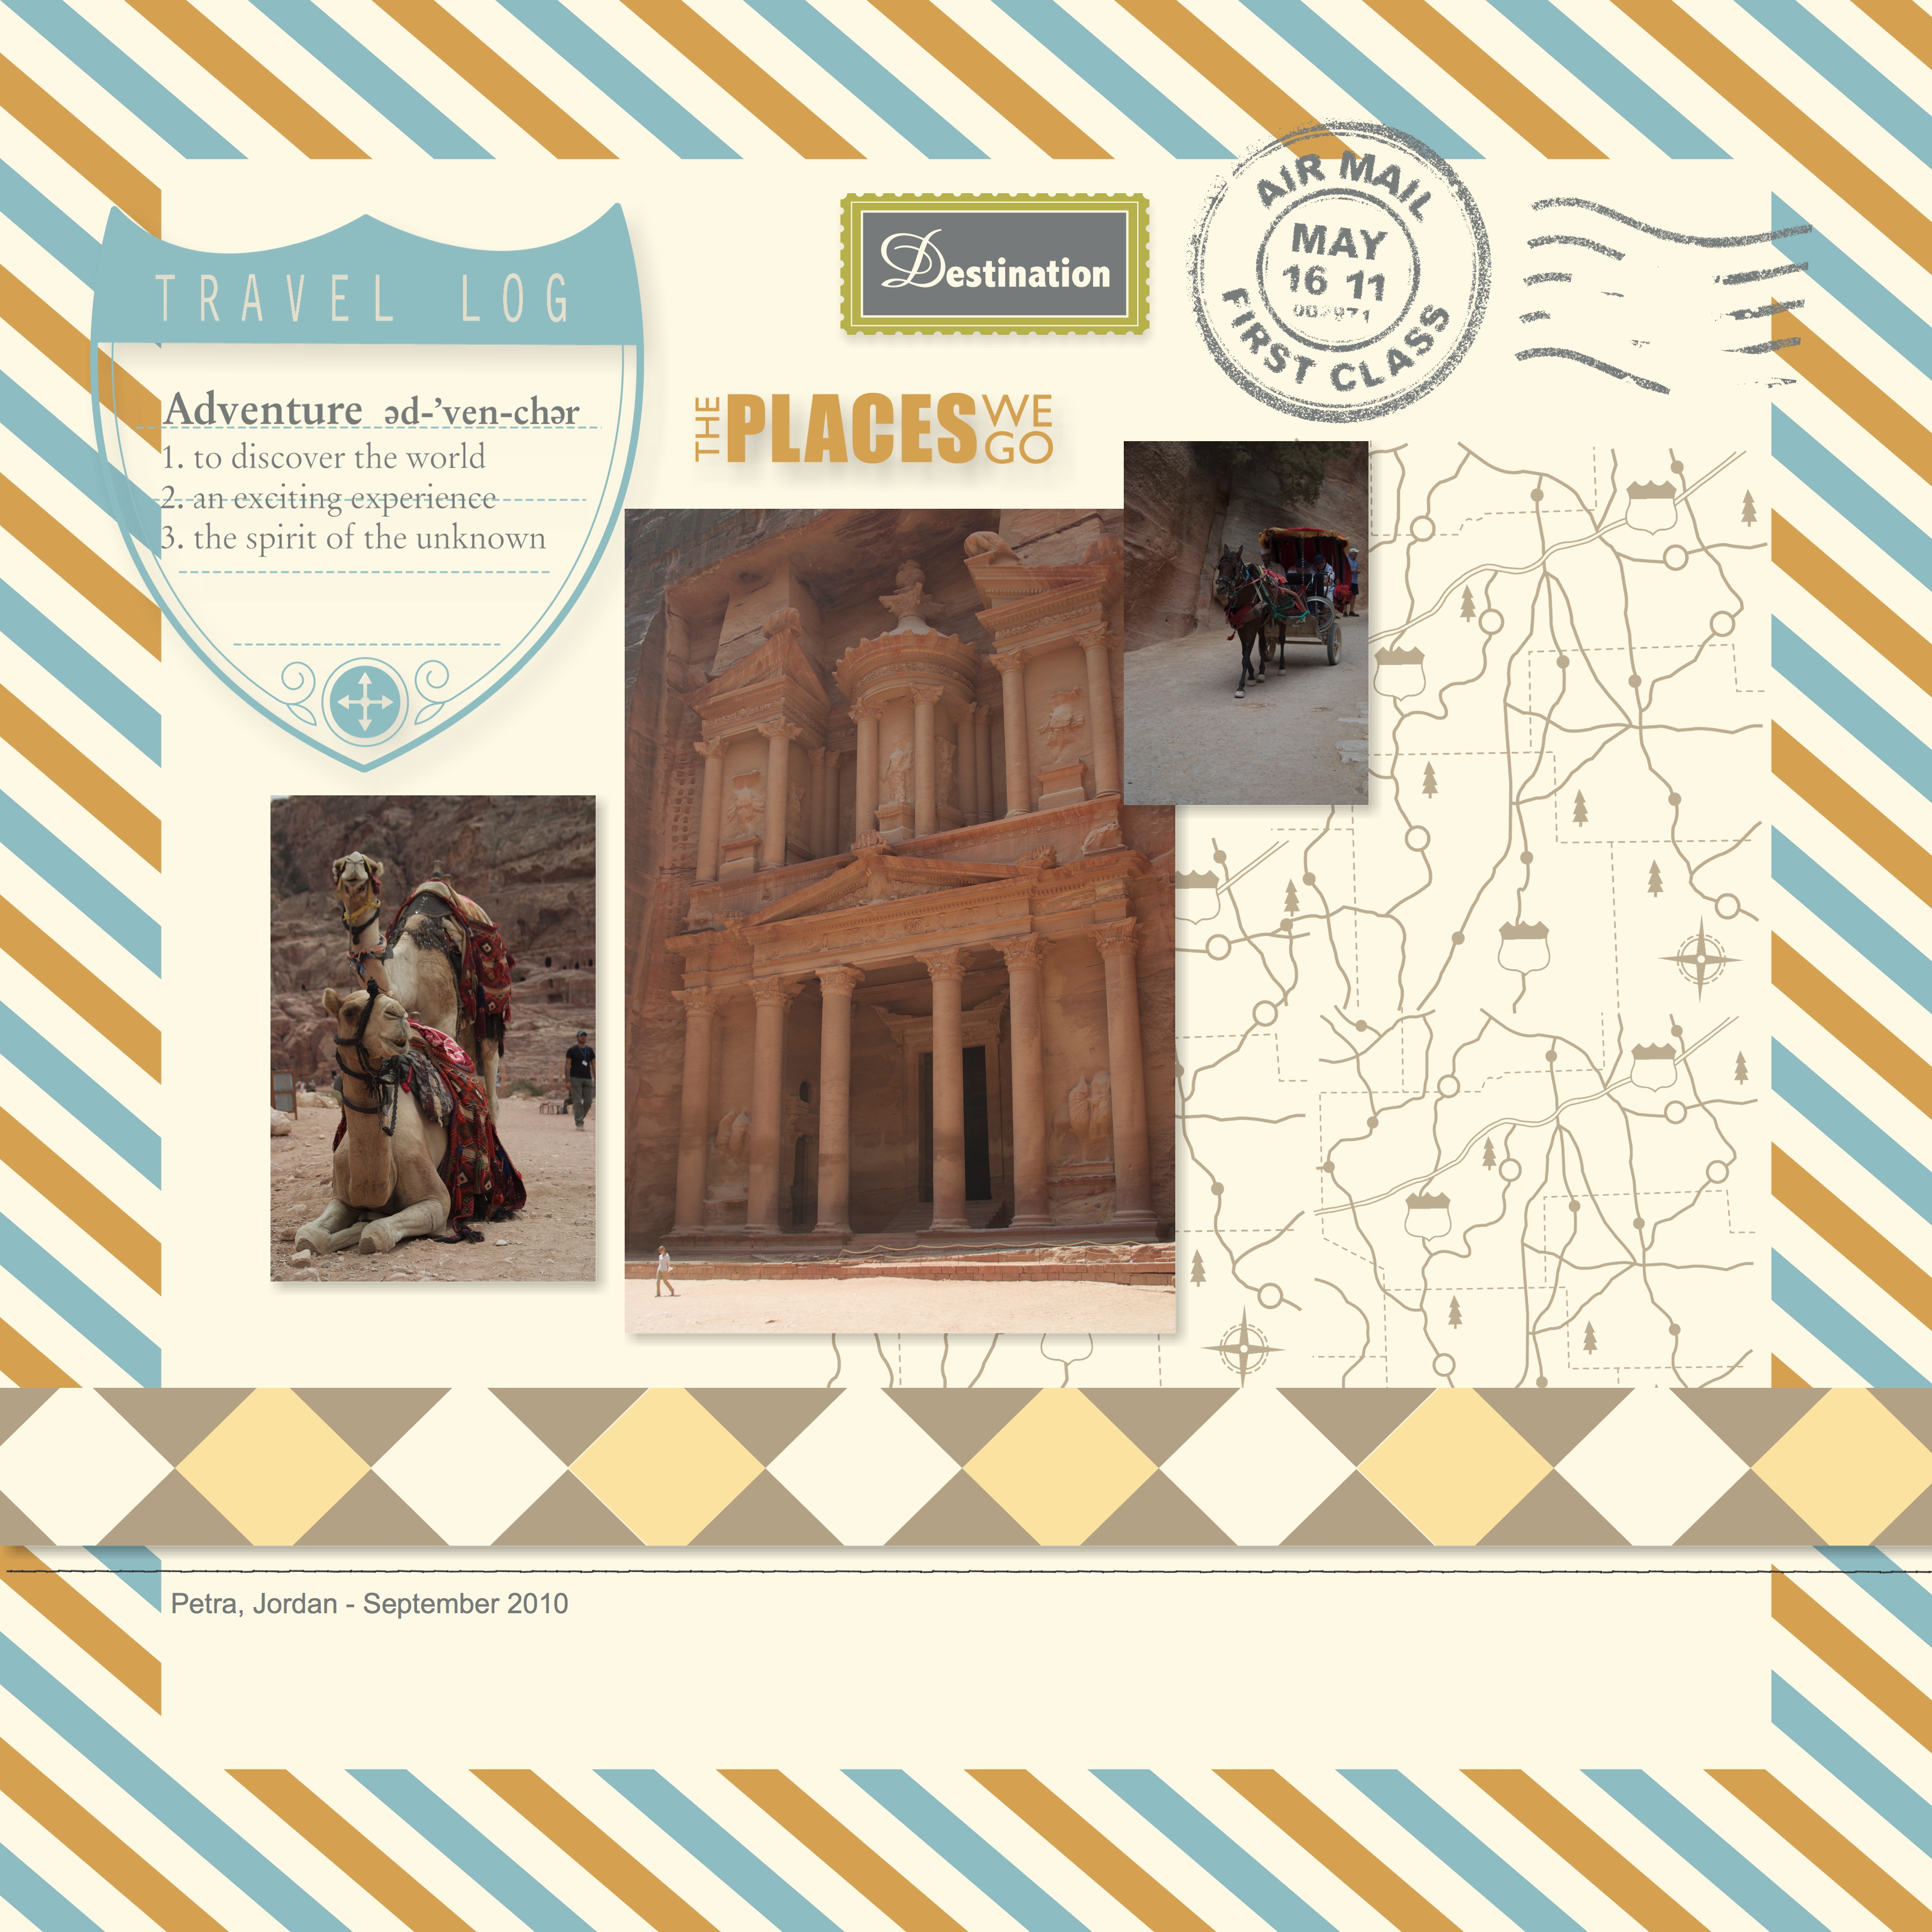 Some basic scrapbook pages in MDS